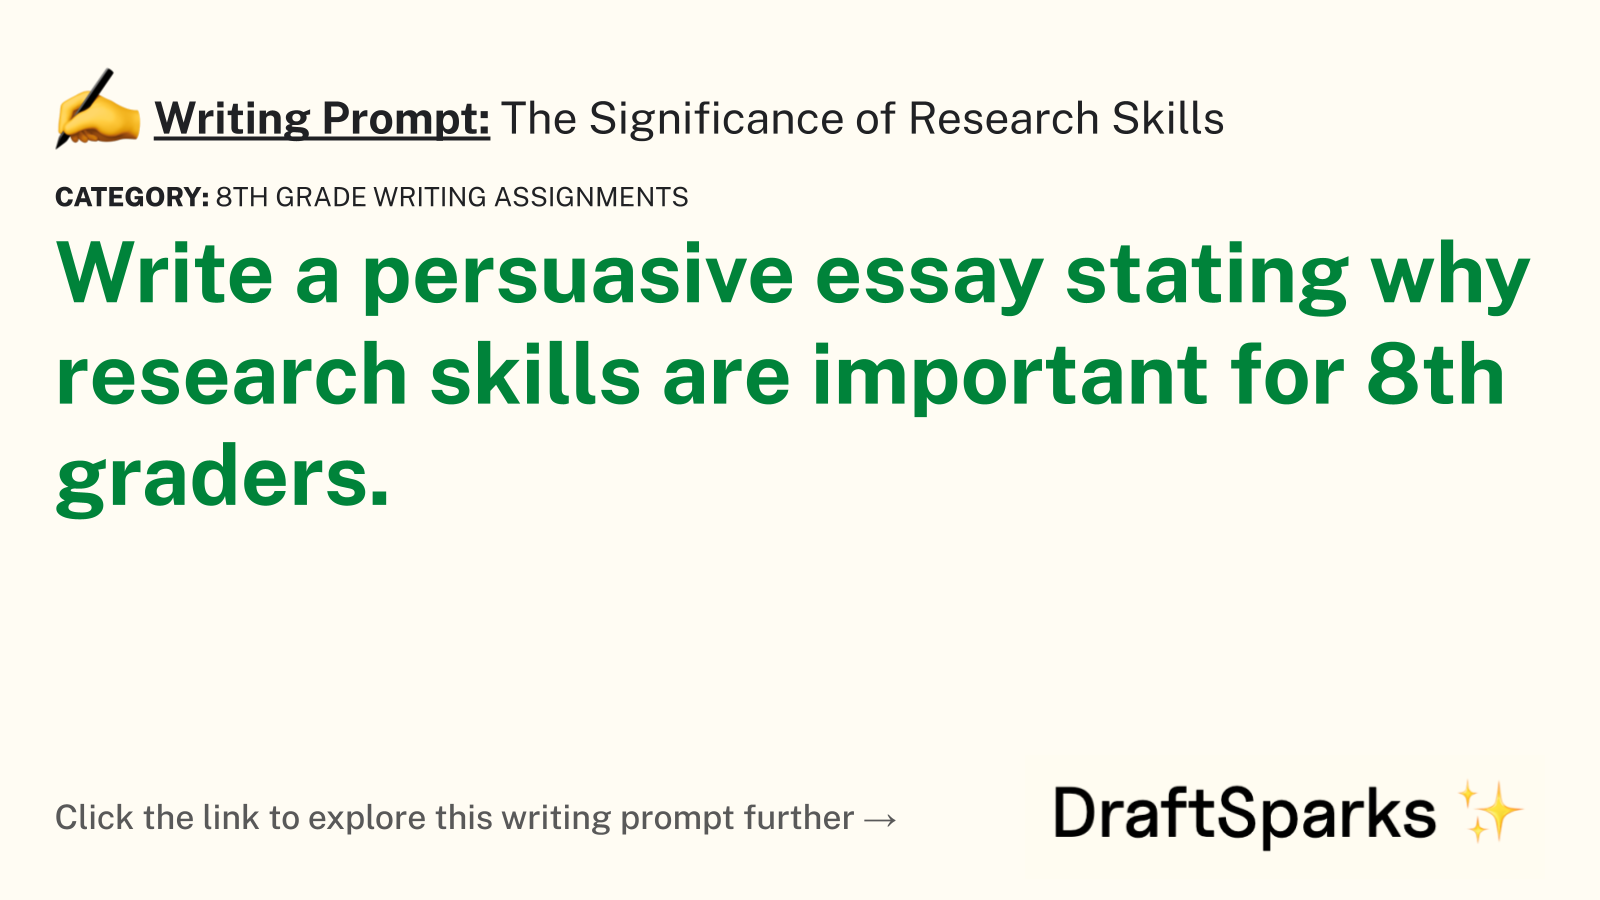 The Significance of Research Skills